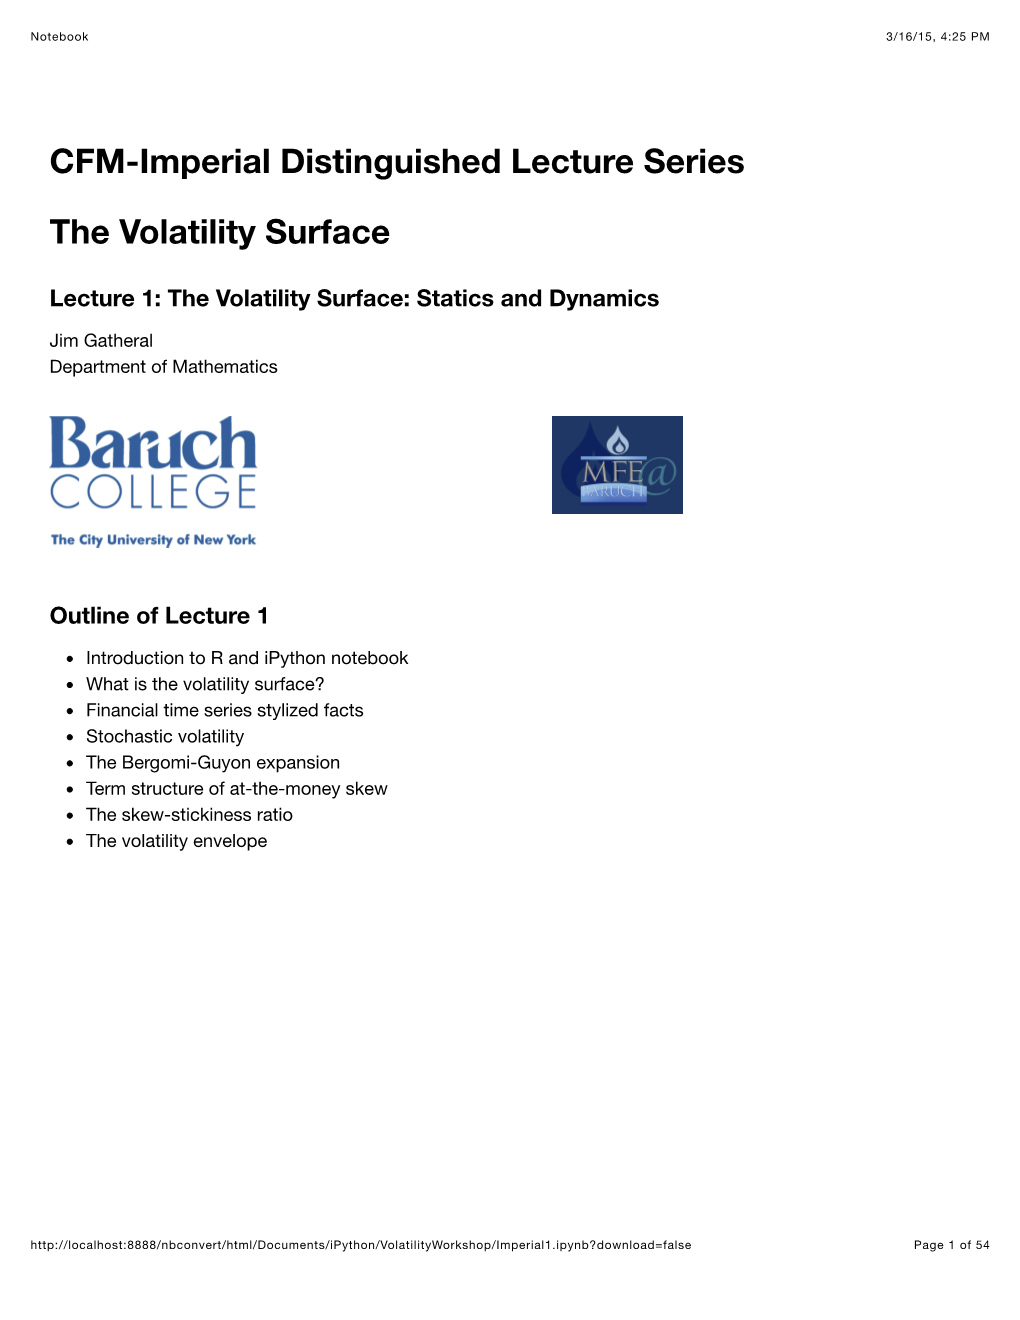 CFM-Imperial Distinguished Lecture Series the Volatility Surface